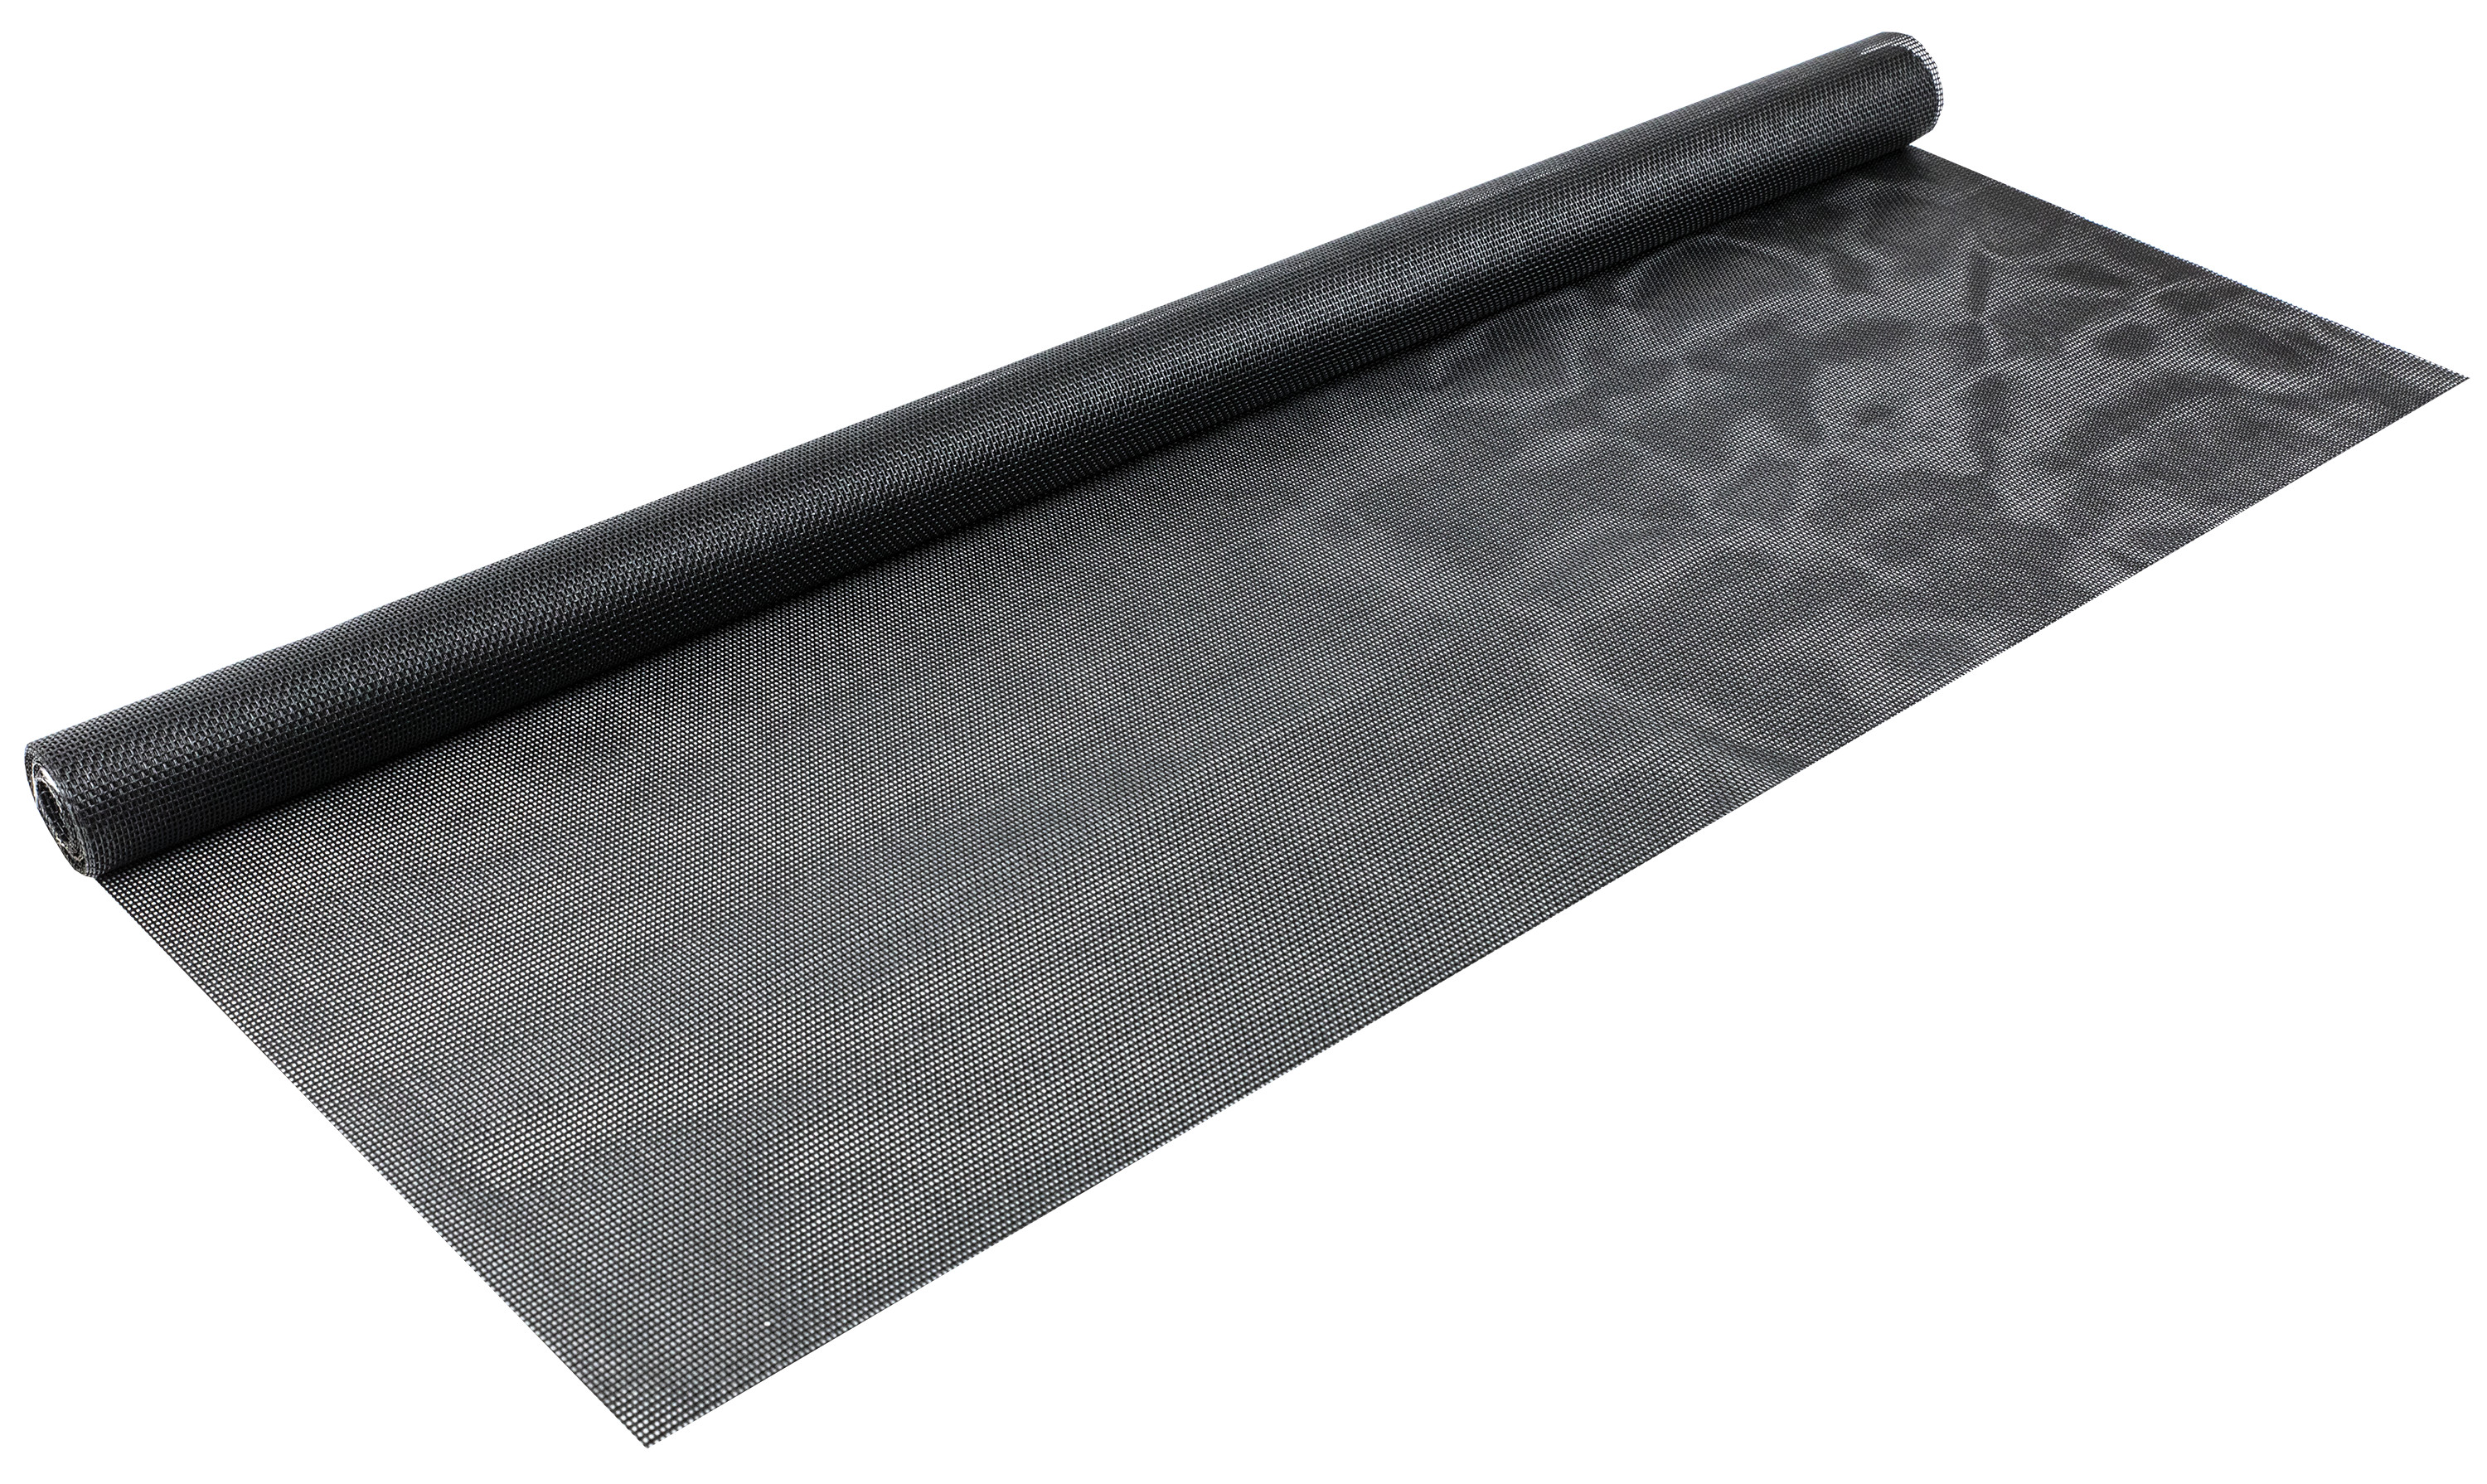 ADFORS Polyester Screen Roll, Pet Resistant, 36 In. x 84 In. - Charcoal - image 3 of 8